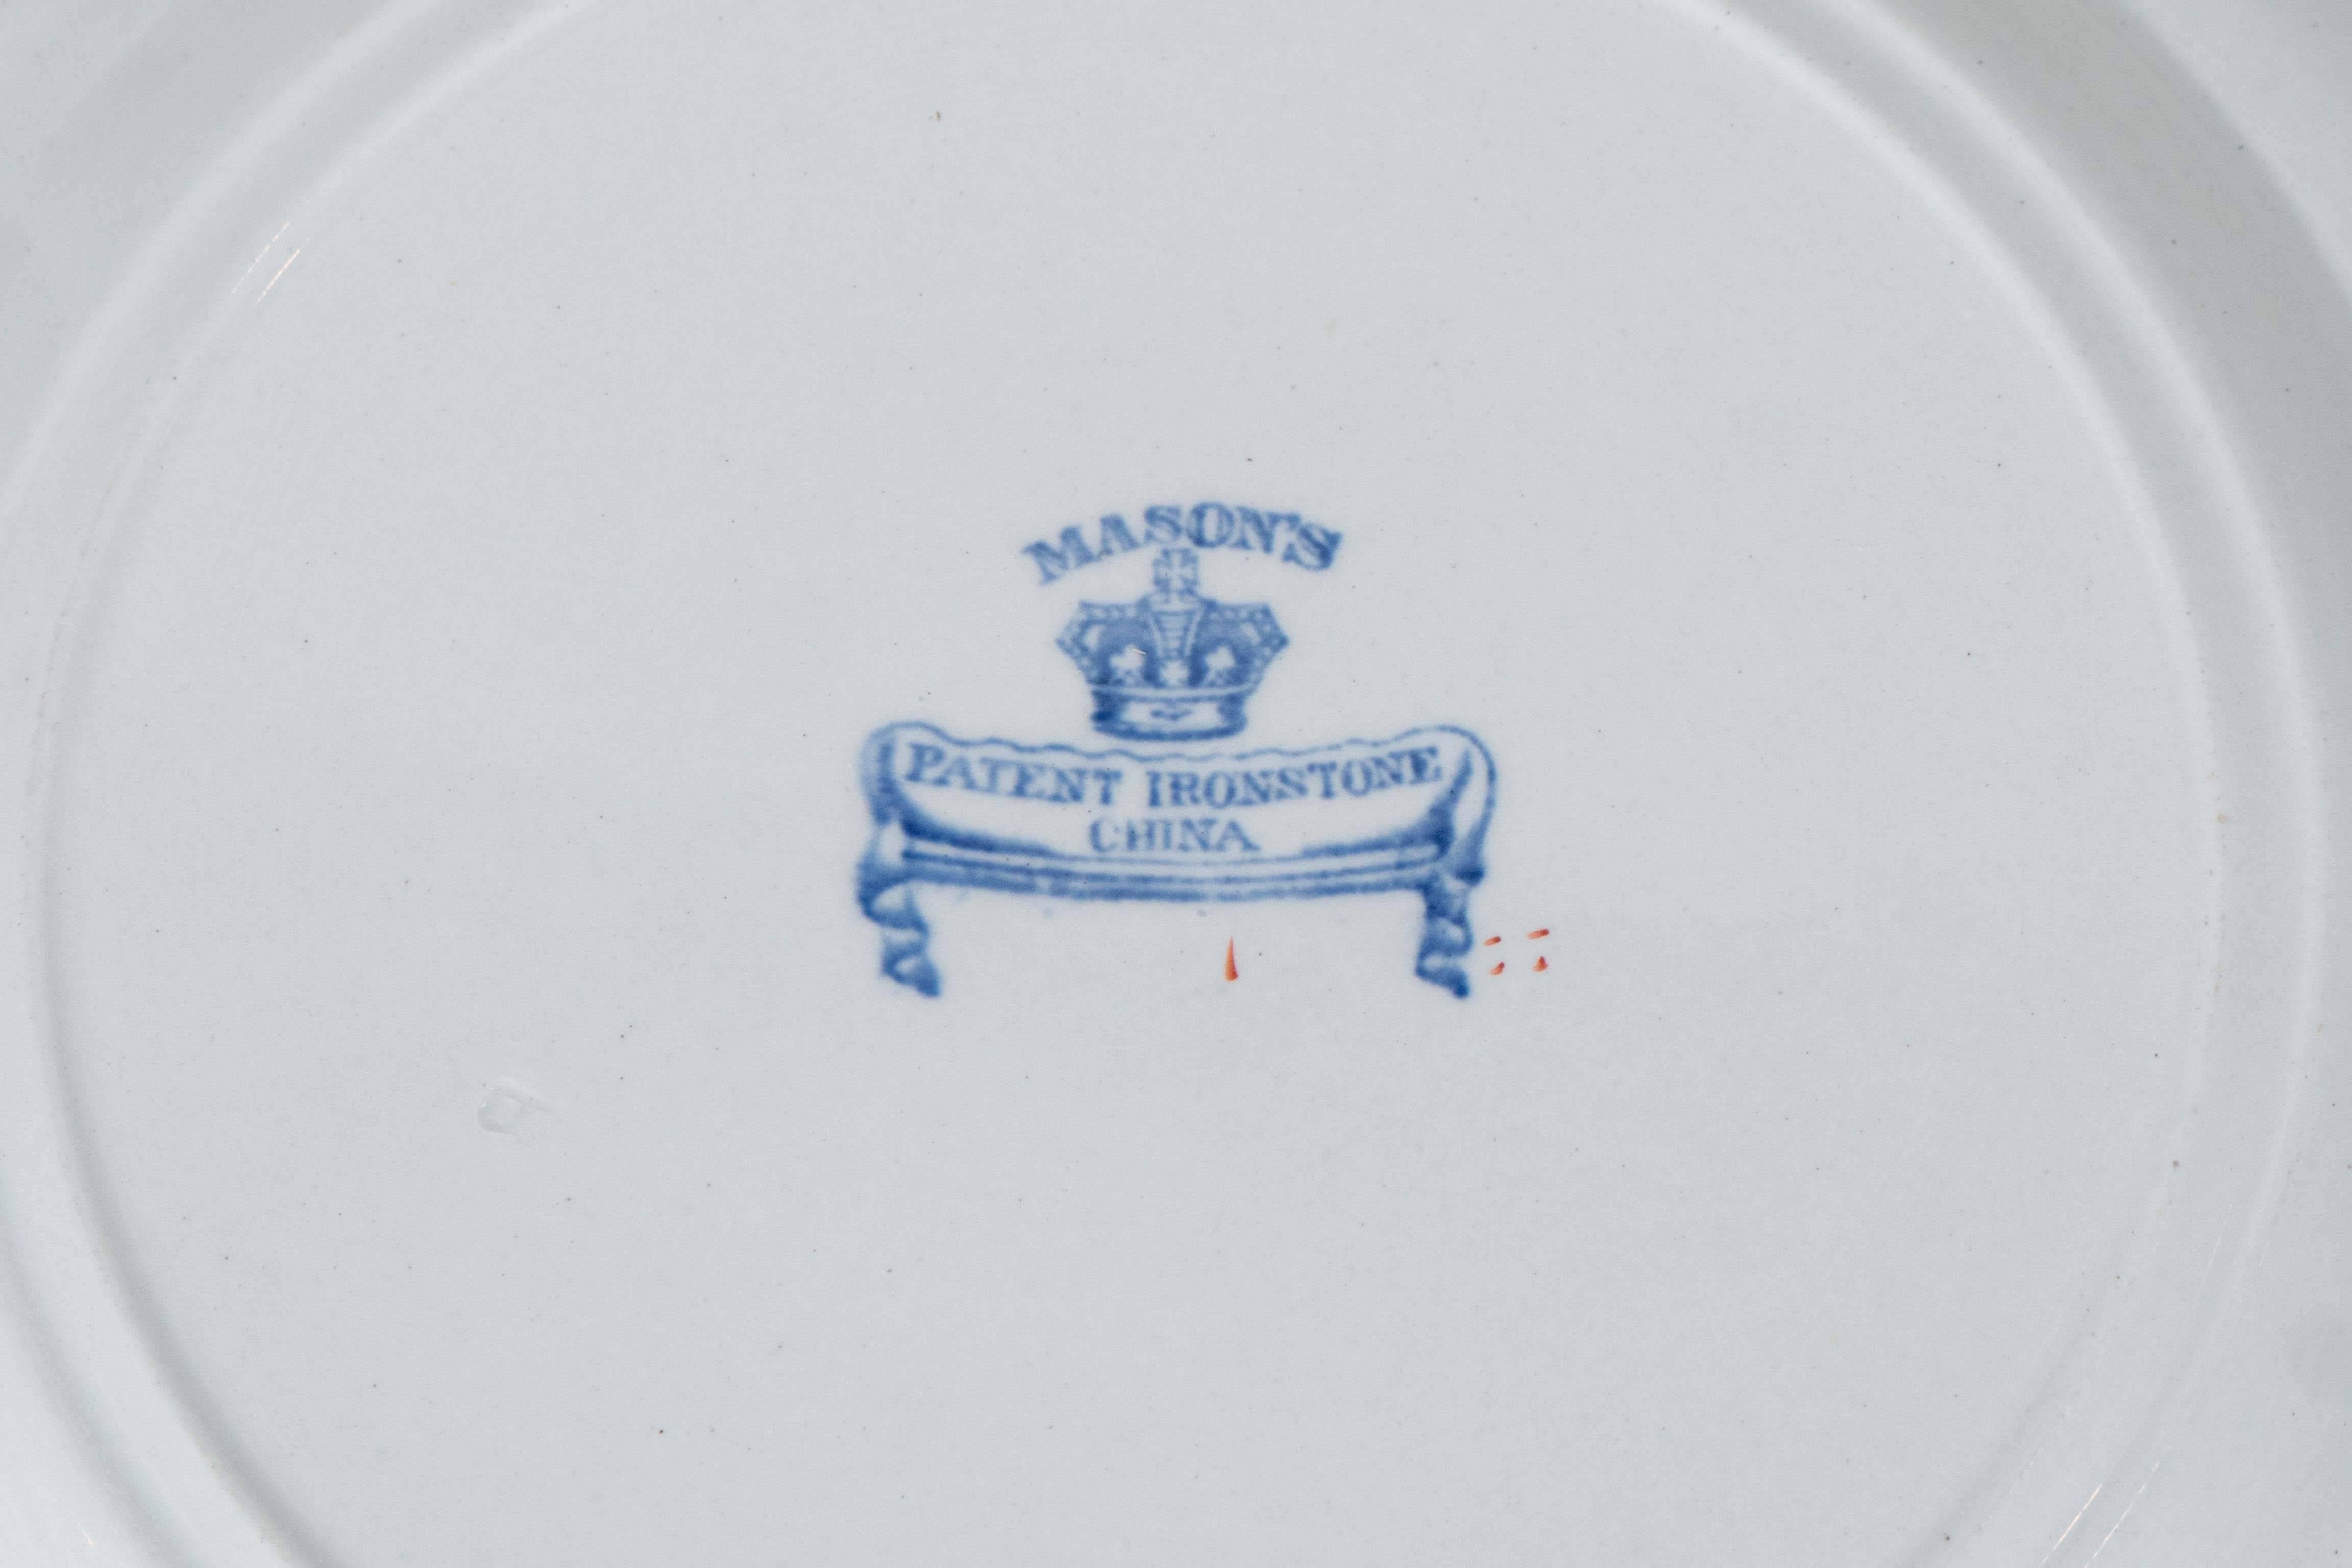 Set of Mason's Ironstone Dinner and Soup Dishes in 